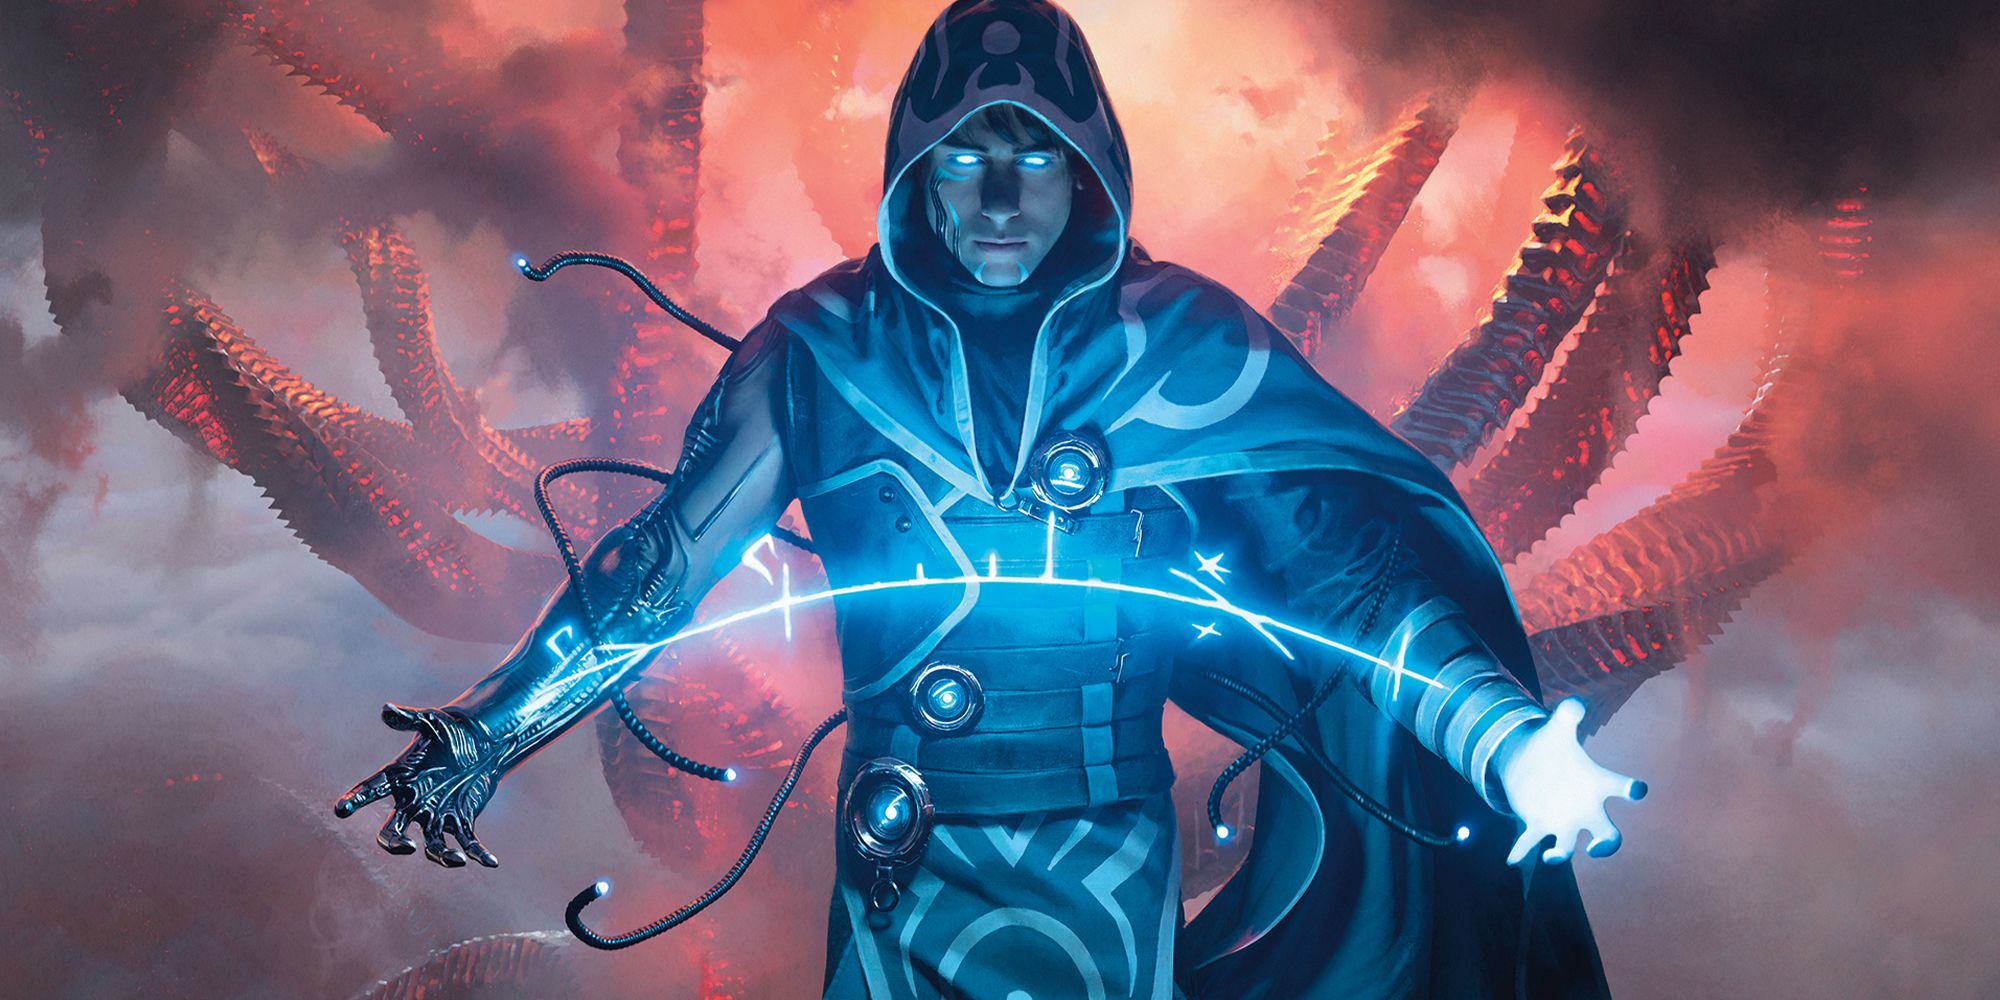 A compleated, Phyrexian Jace.